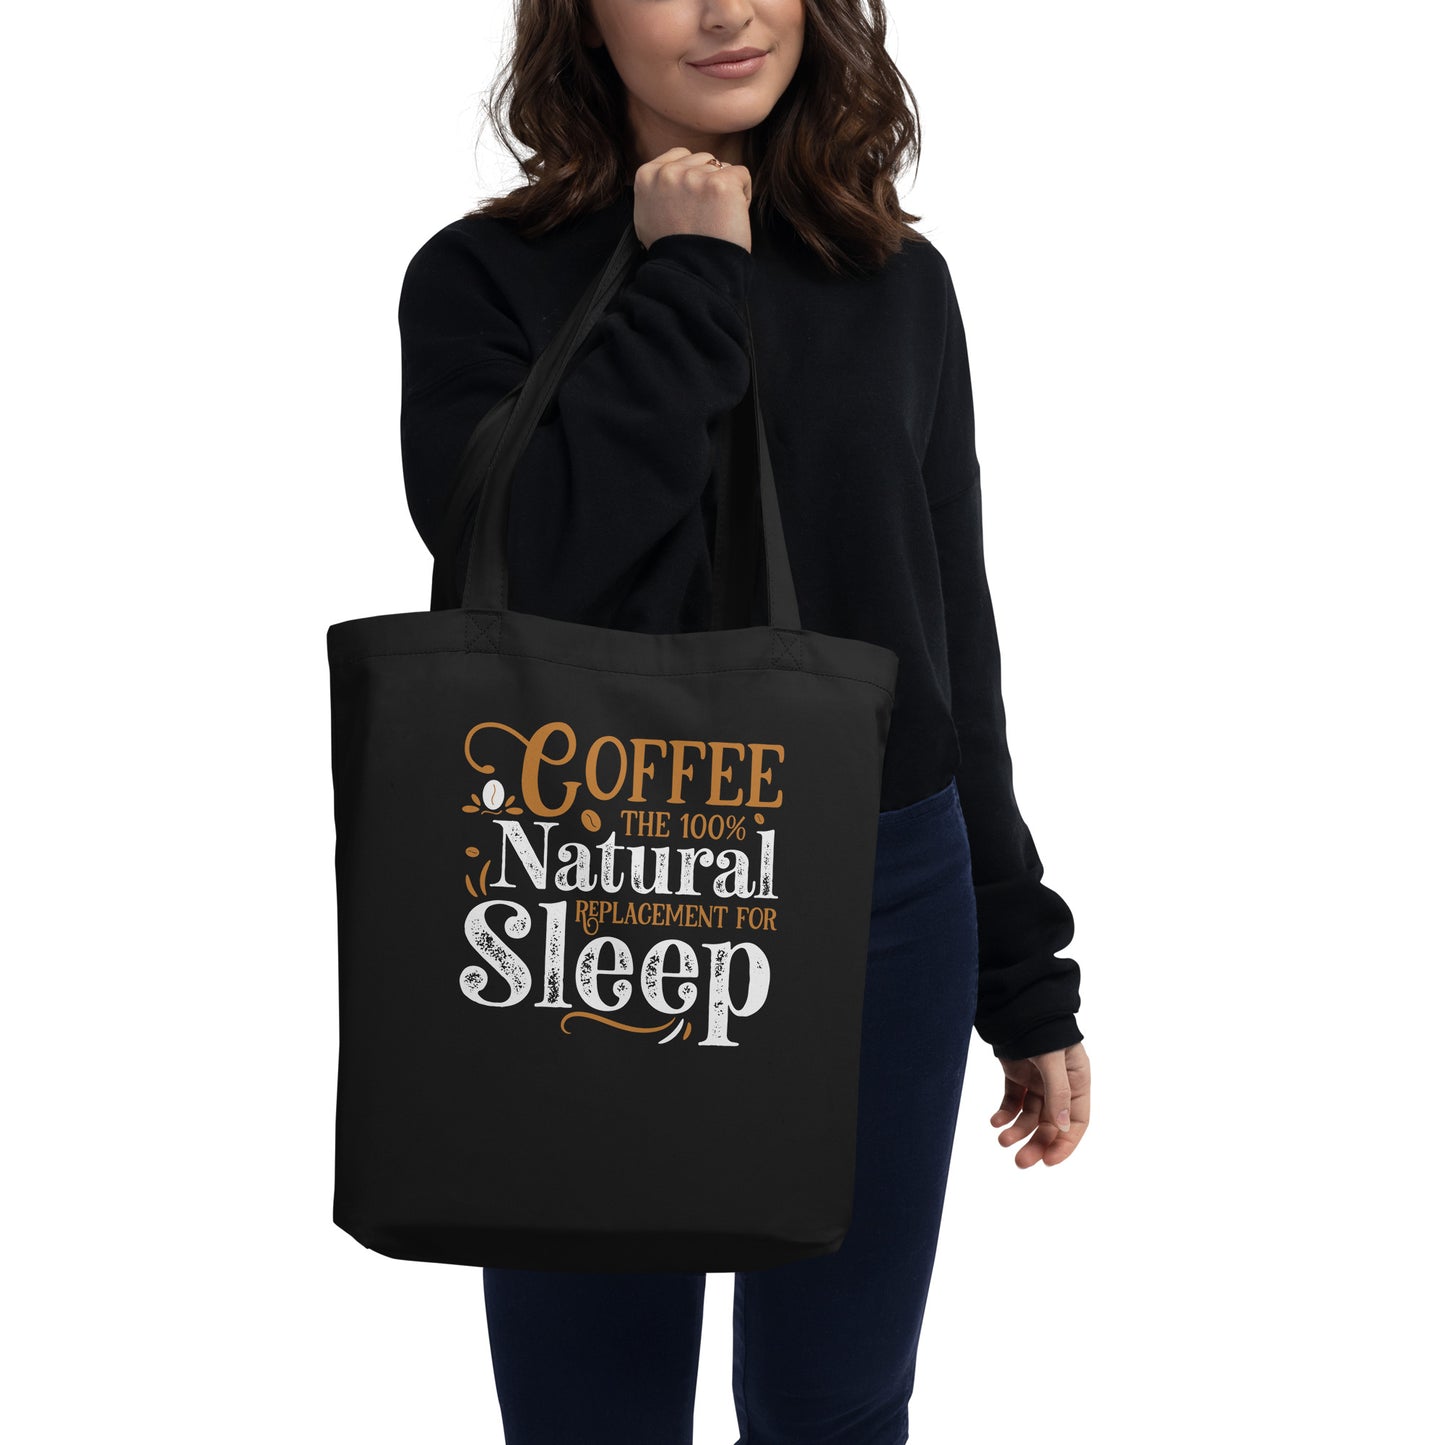 Coffee The 100% Natural Replacement for Sleep Eco Tote Bag